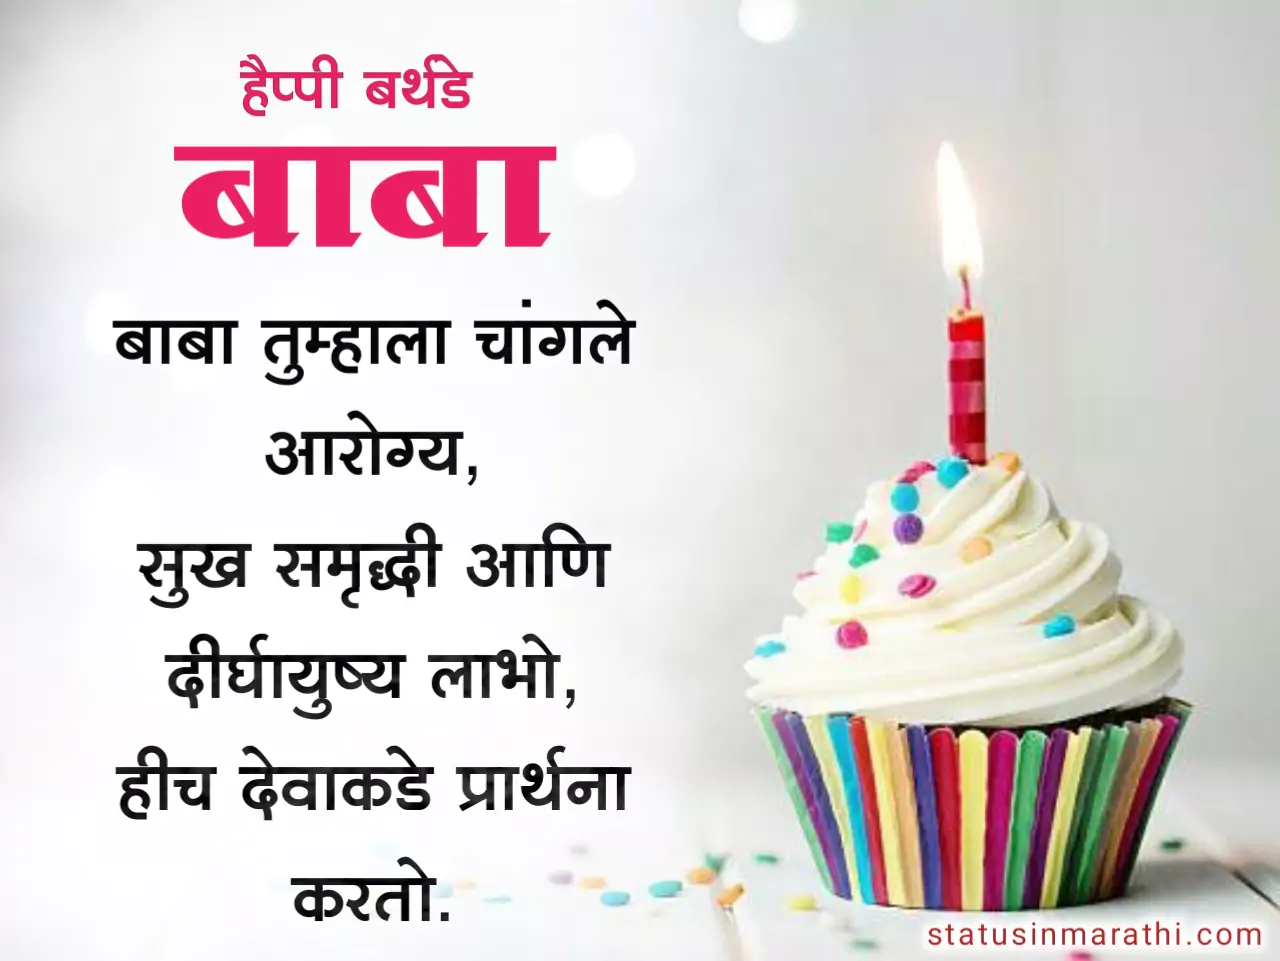 Happy Birthday Image for father in marathi